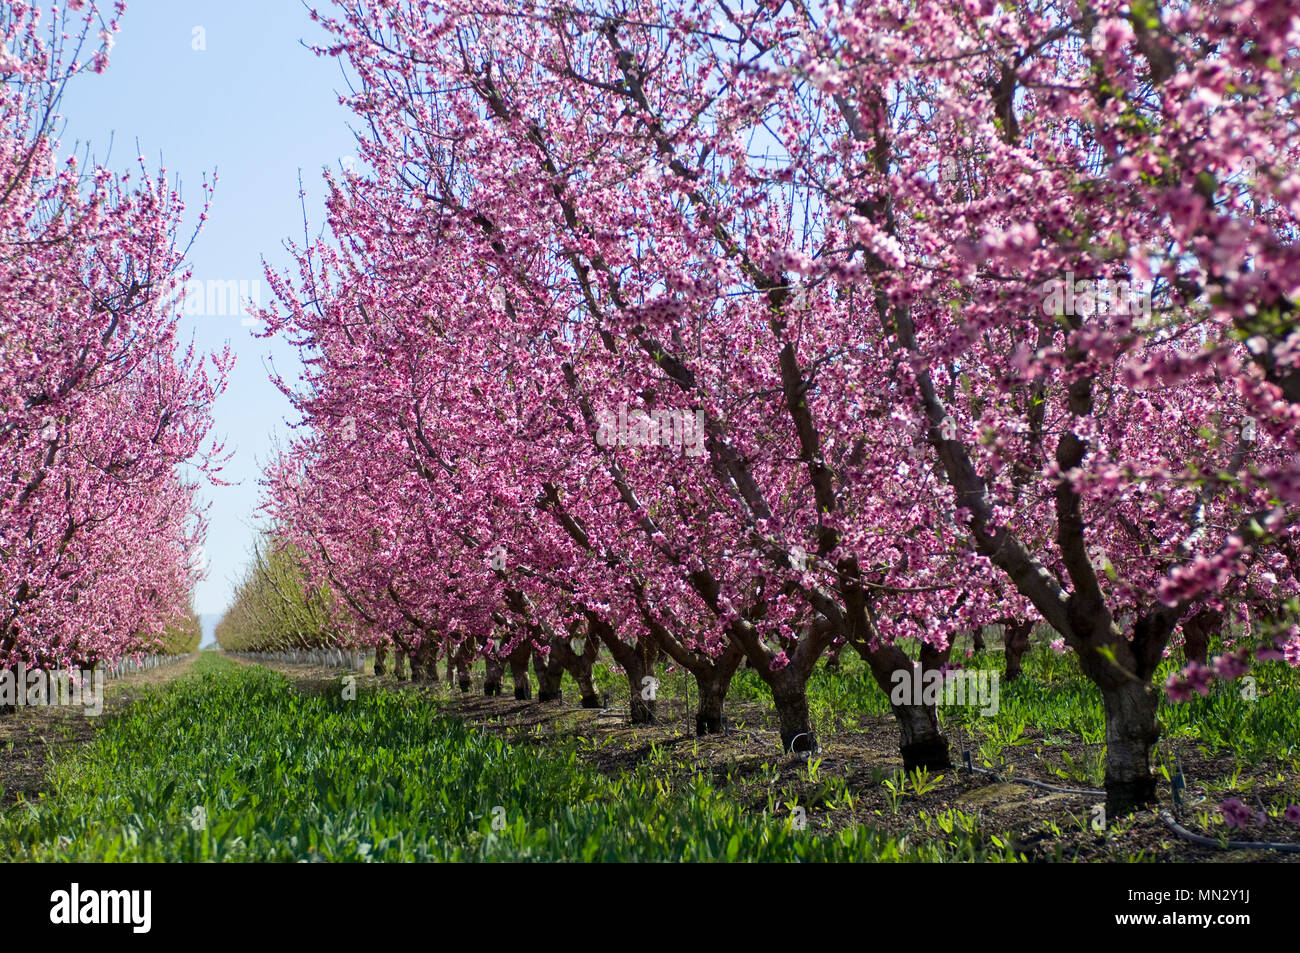 Almond trees covered in blooming pink flowers, grow in rows in the California Valley. Stock Photo